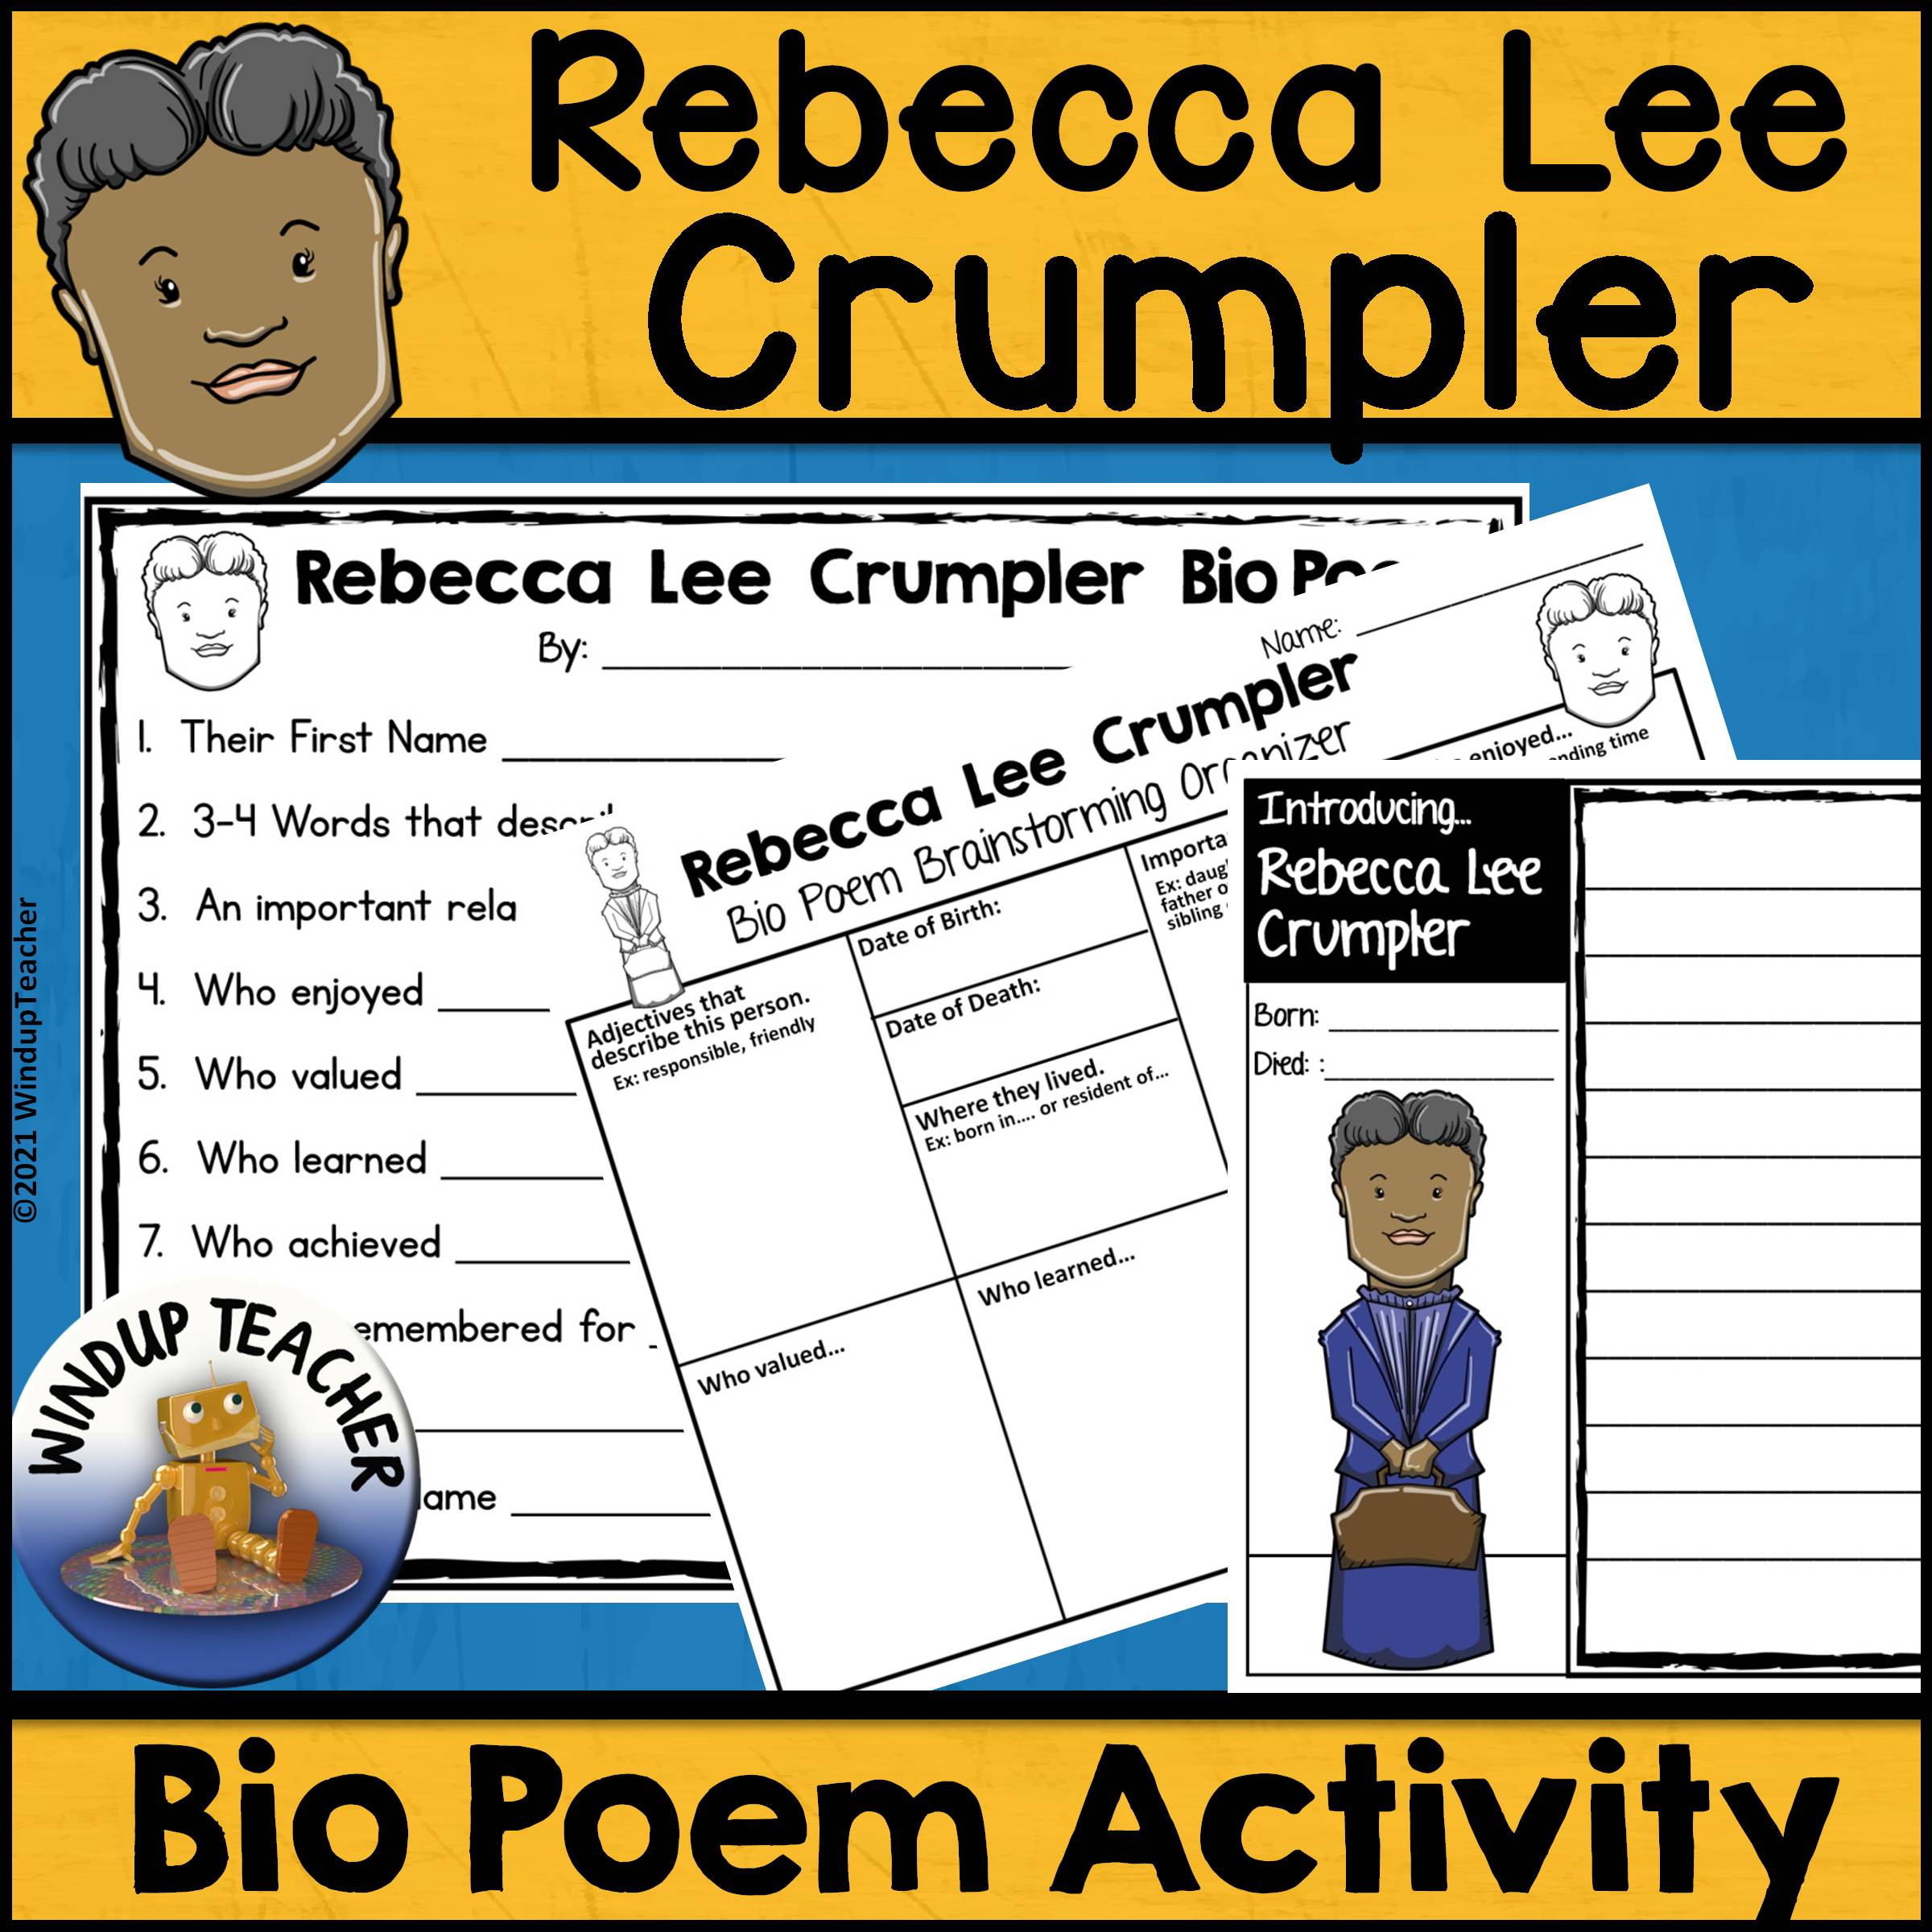 Rebecca Lee Crumpler Biography Poem Activity and Writing Paper - Classful